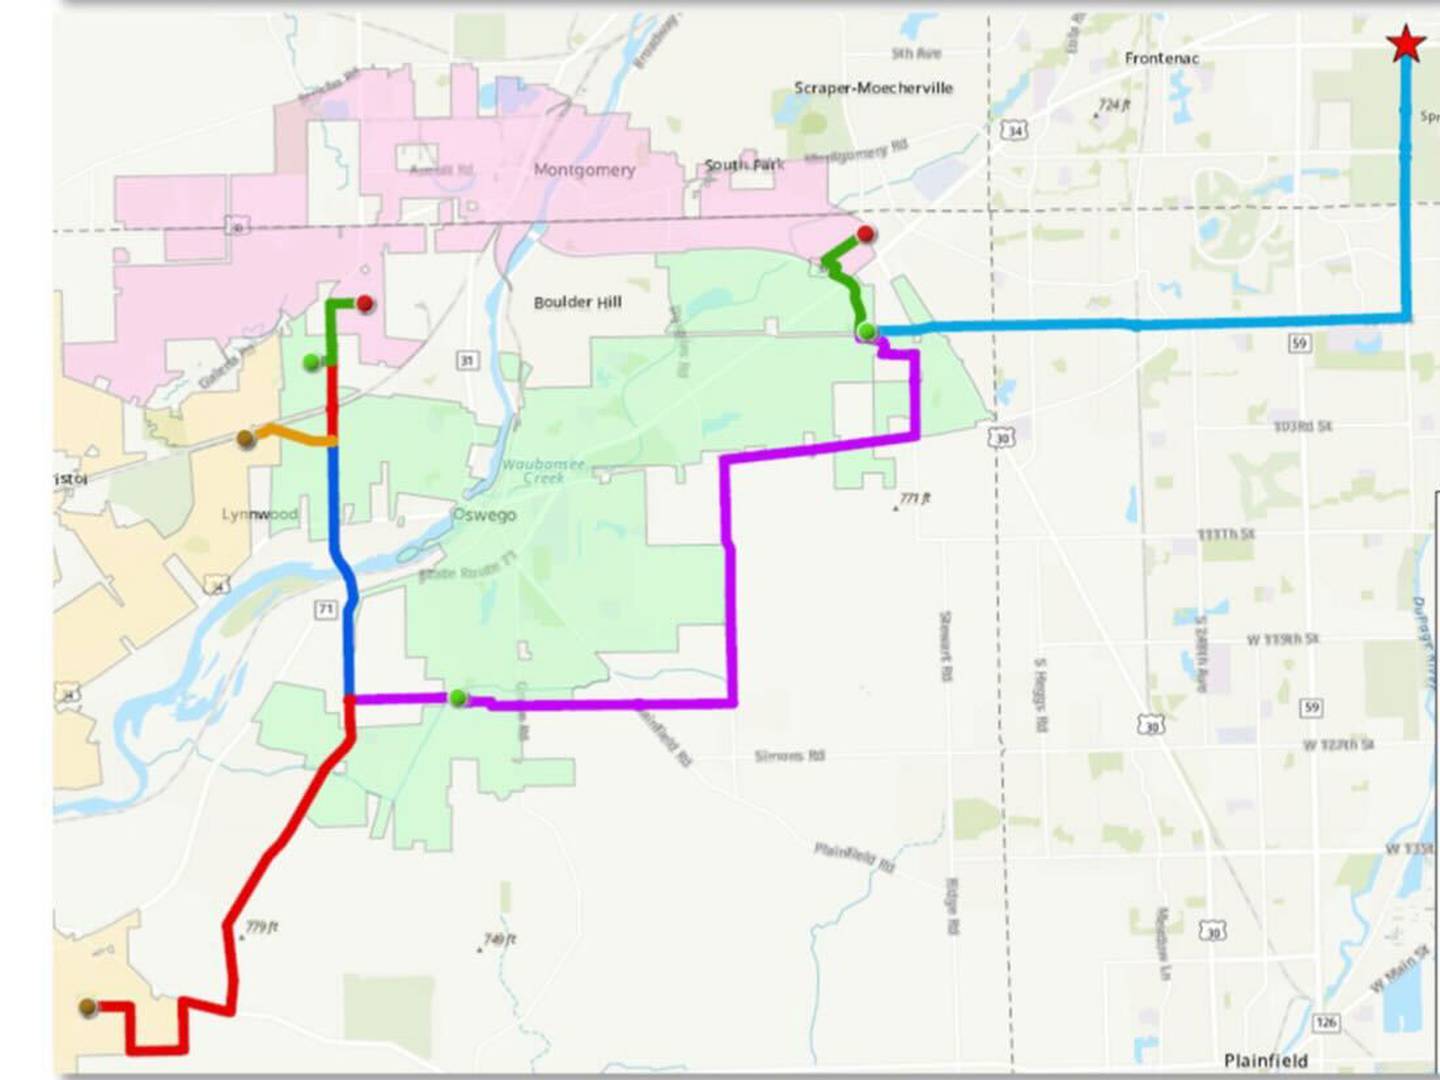 The proposed route of the Lake Michigan water pipeline that would serve Montgomery, Oswego and Yorkville is shown on the map above. The pipeline would connect with an existing pipeline near 75th Street and Book Road in Naperville, in the upper right corner. (Map courtesy of the village of Montgomery)